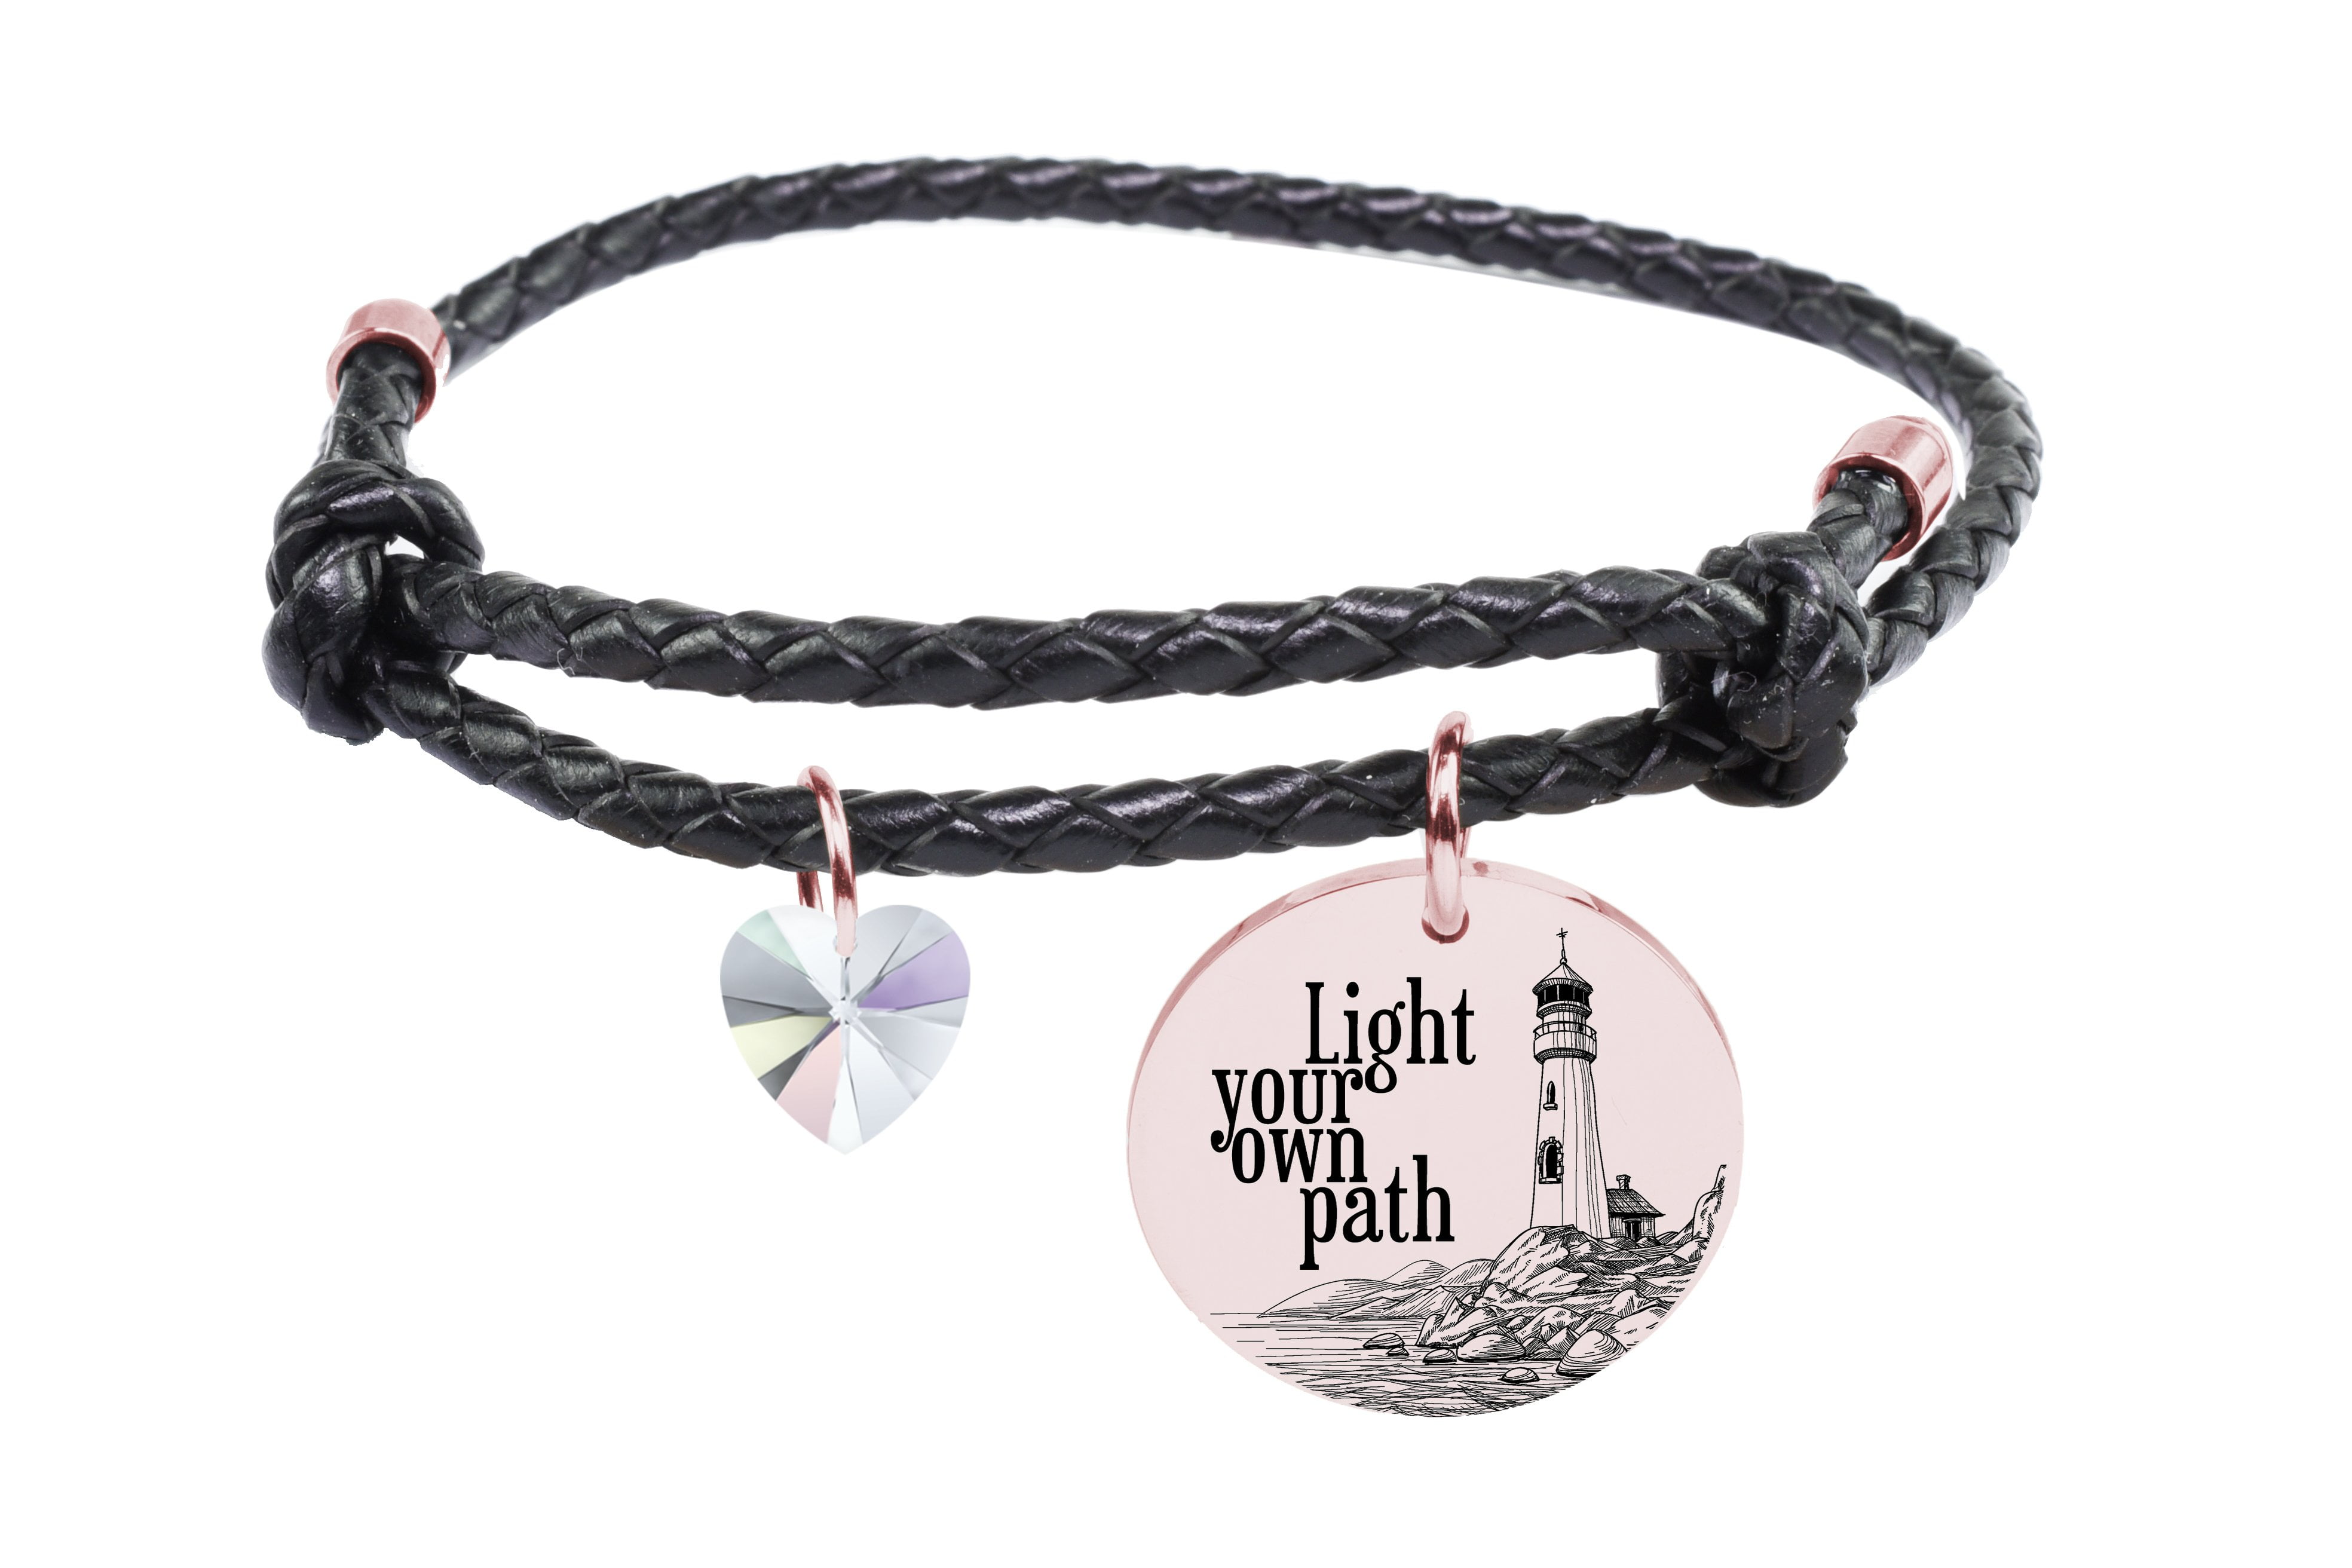 Genuine Adjustable Leather Cord Bracelet - LIGHT YOUR OWN PATH ...